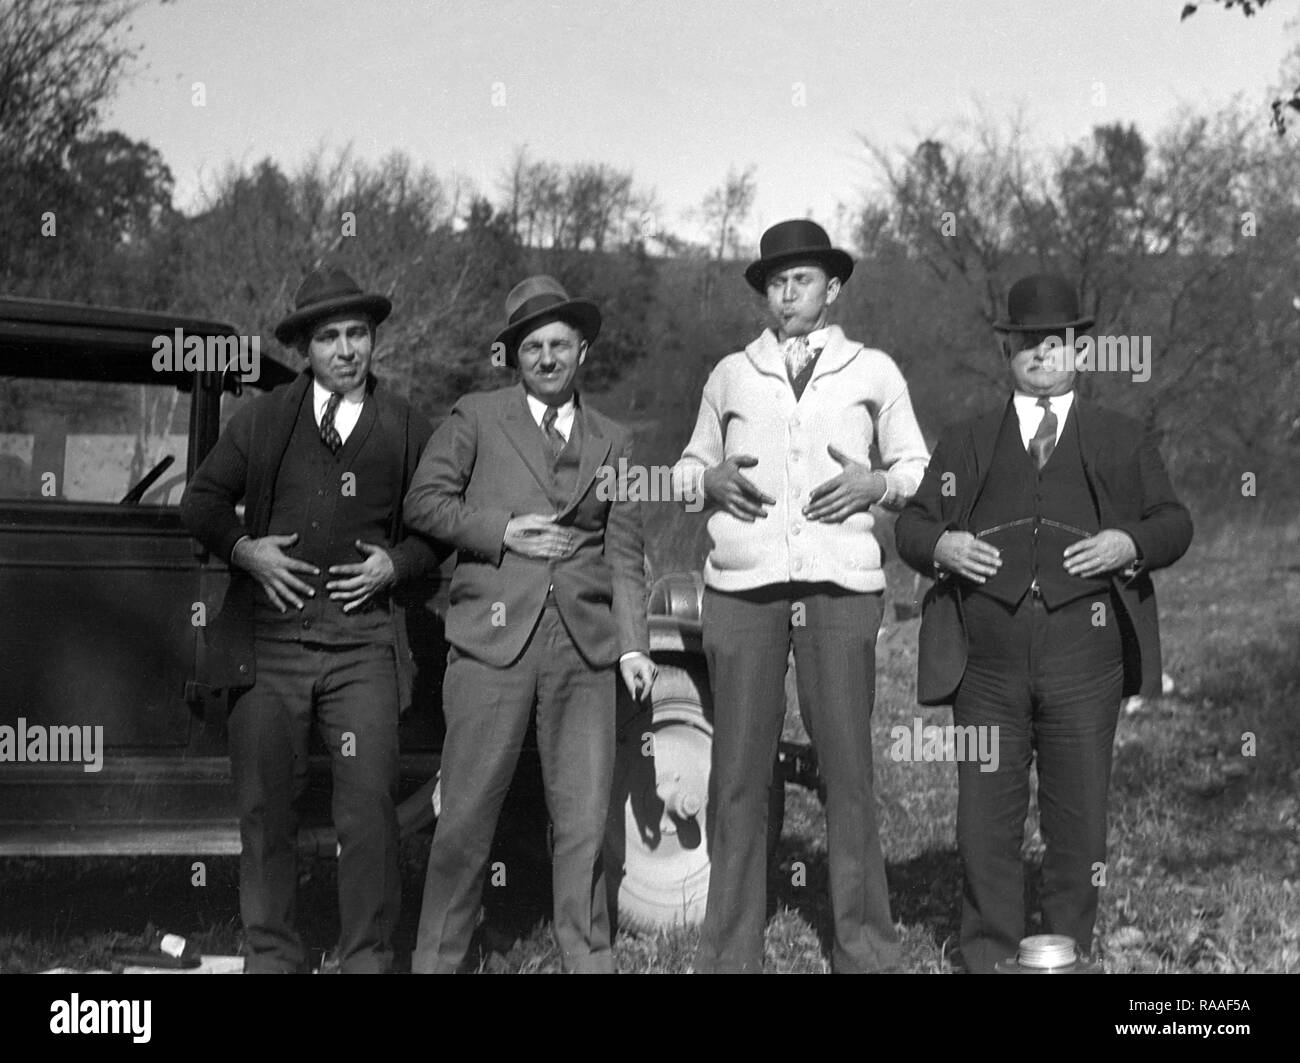 Four well-dressed men seemingly have acquired indigestion all at the same time, ca. 1925. Stock Photo